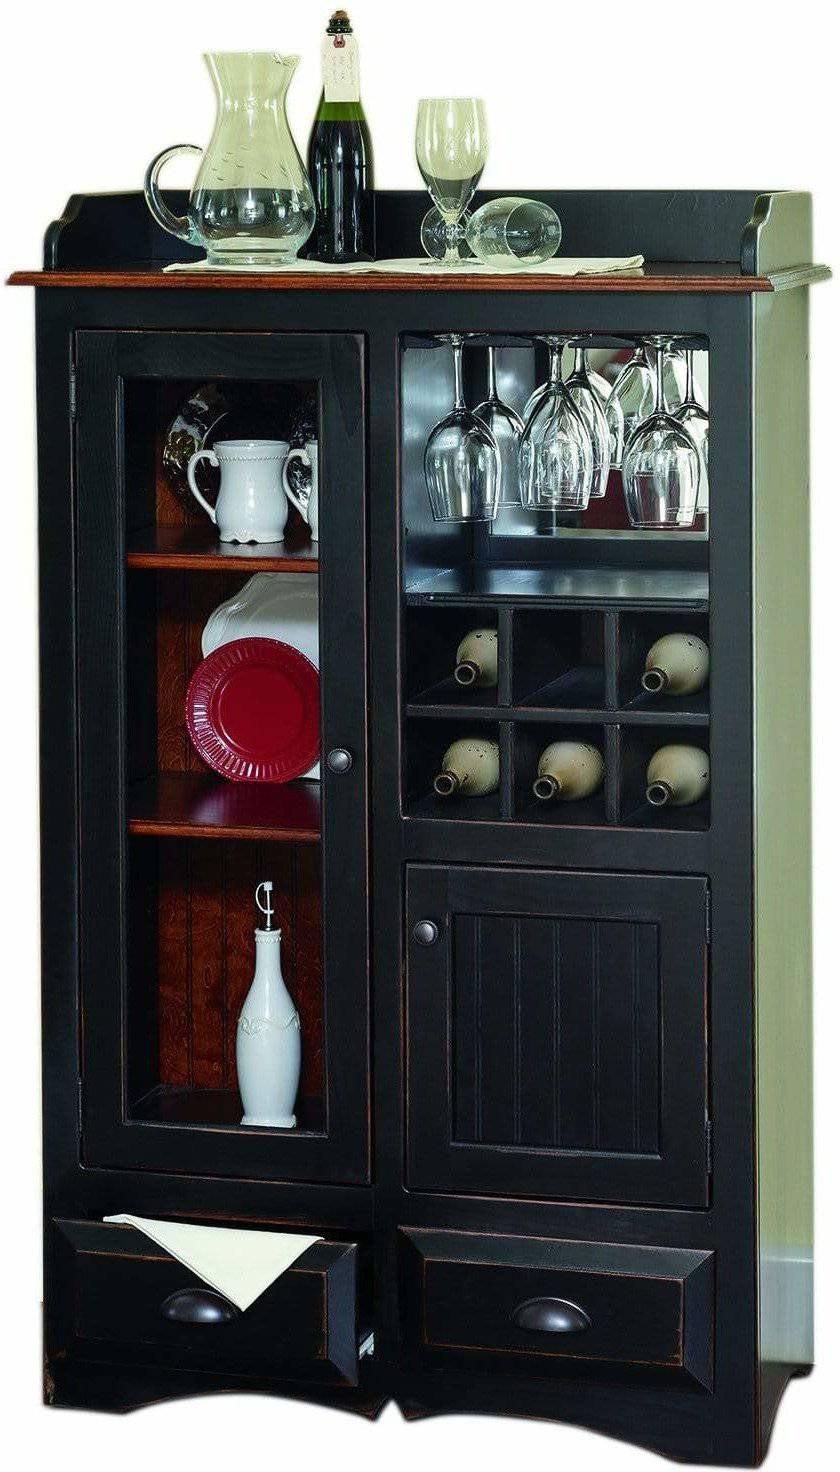 Peachey & Company Cabinet with Wine Storage-Rustic Furniture Marketplace